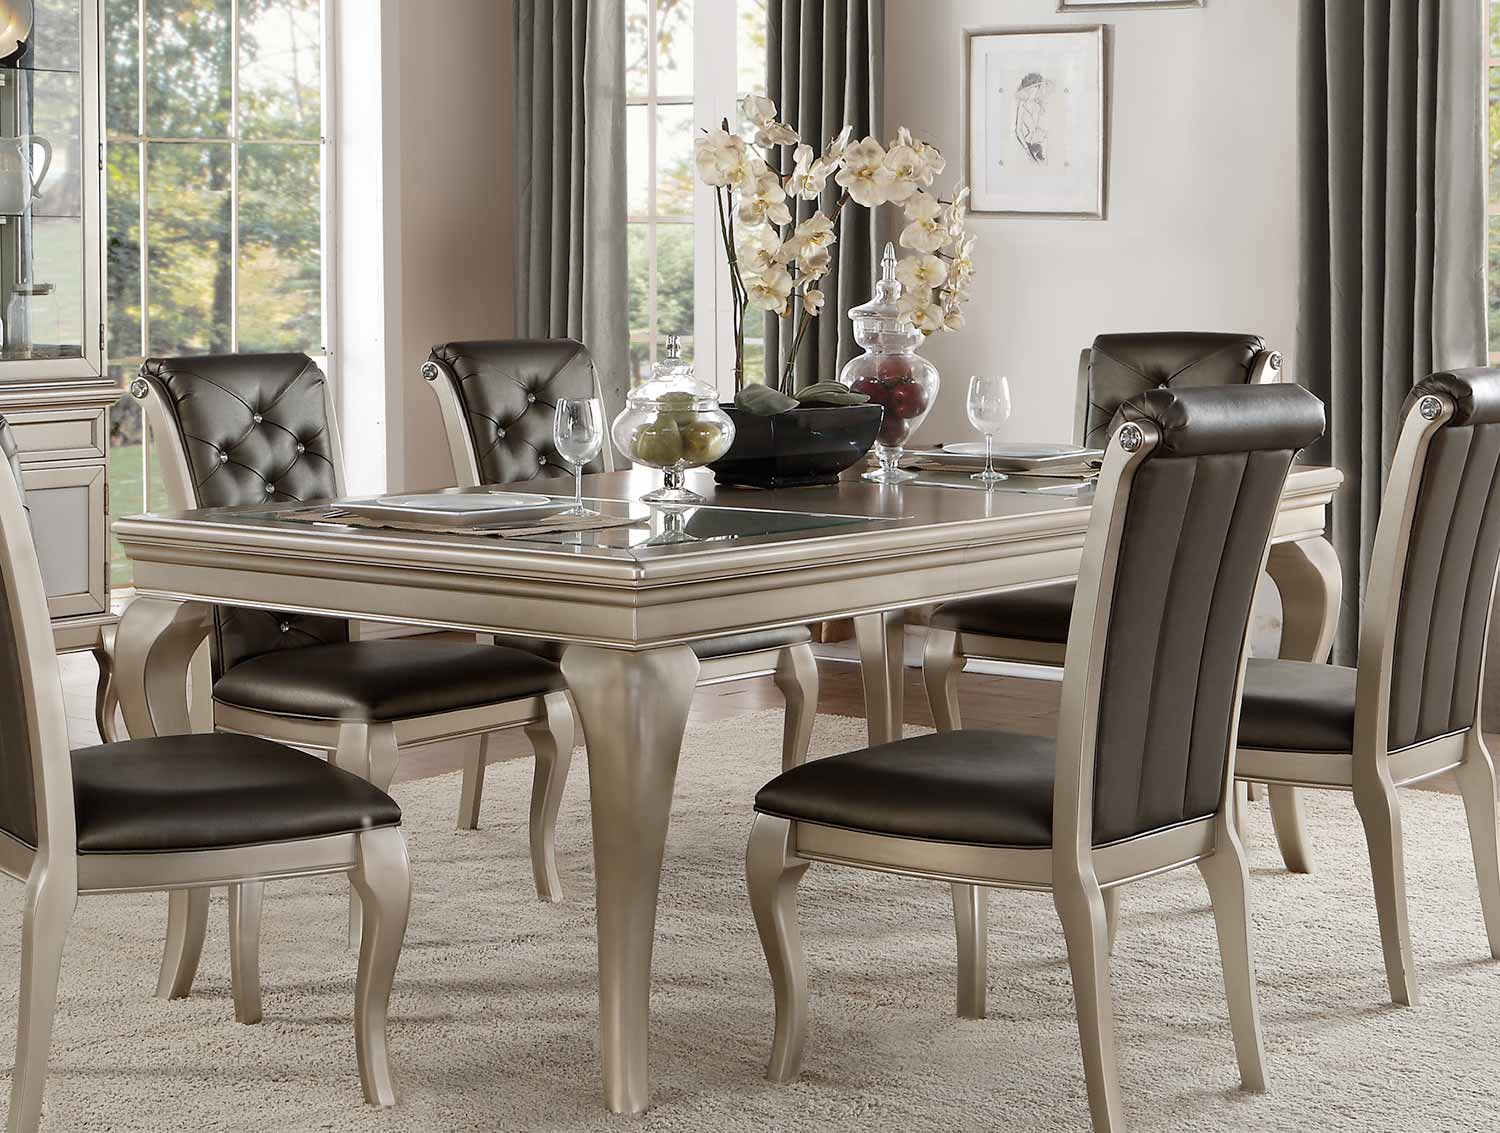 Homelegance Crawford Dining Table with Leaf - Silver